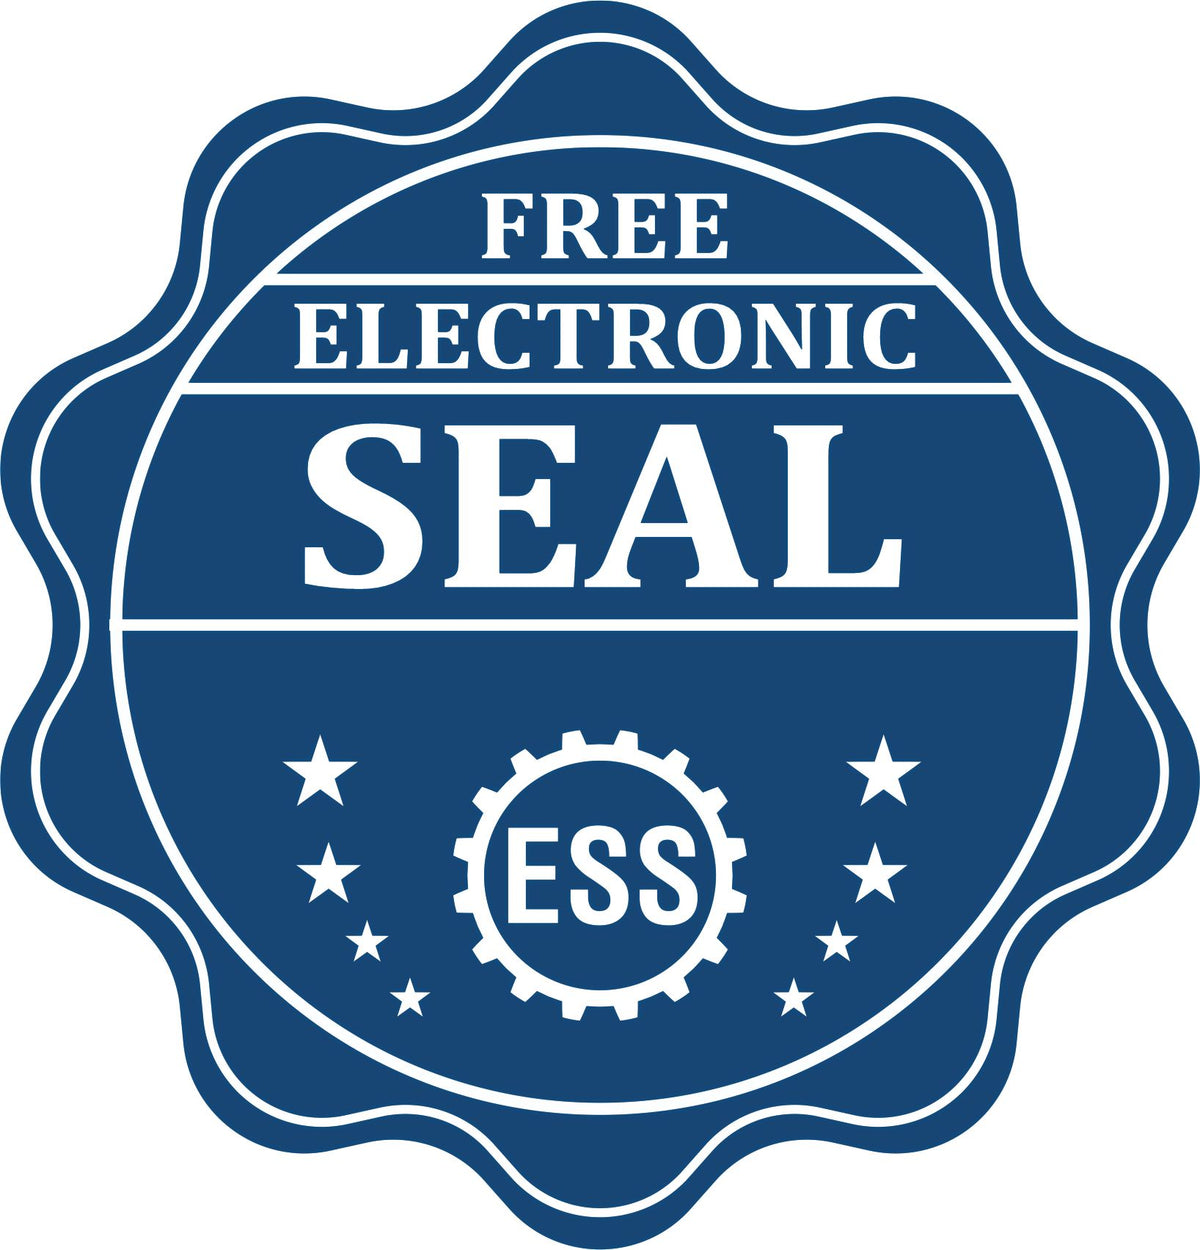 A badge showing a free electronic seal for the Soft Pocket Alaska Landscape Architect Embosser with stars and the ESS gear on the emblem.